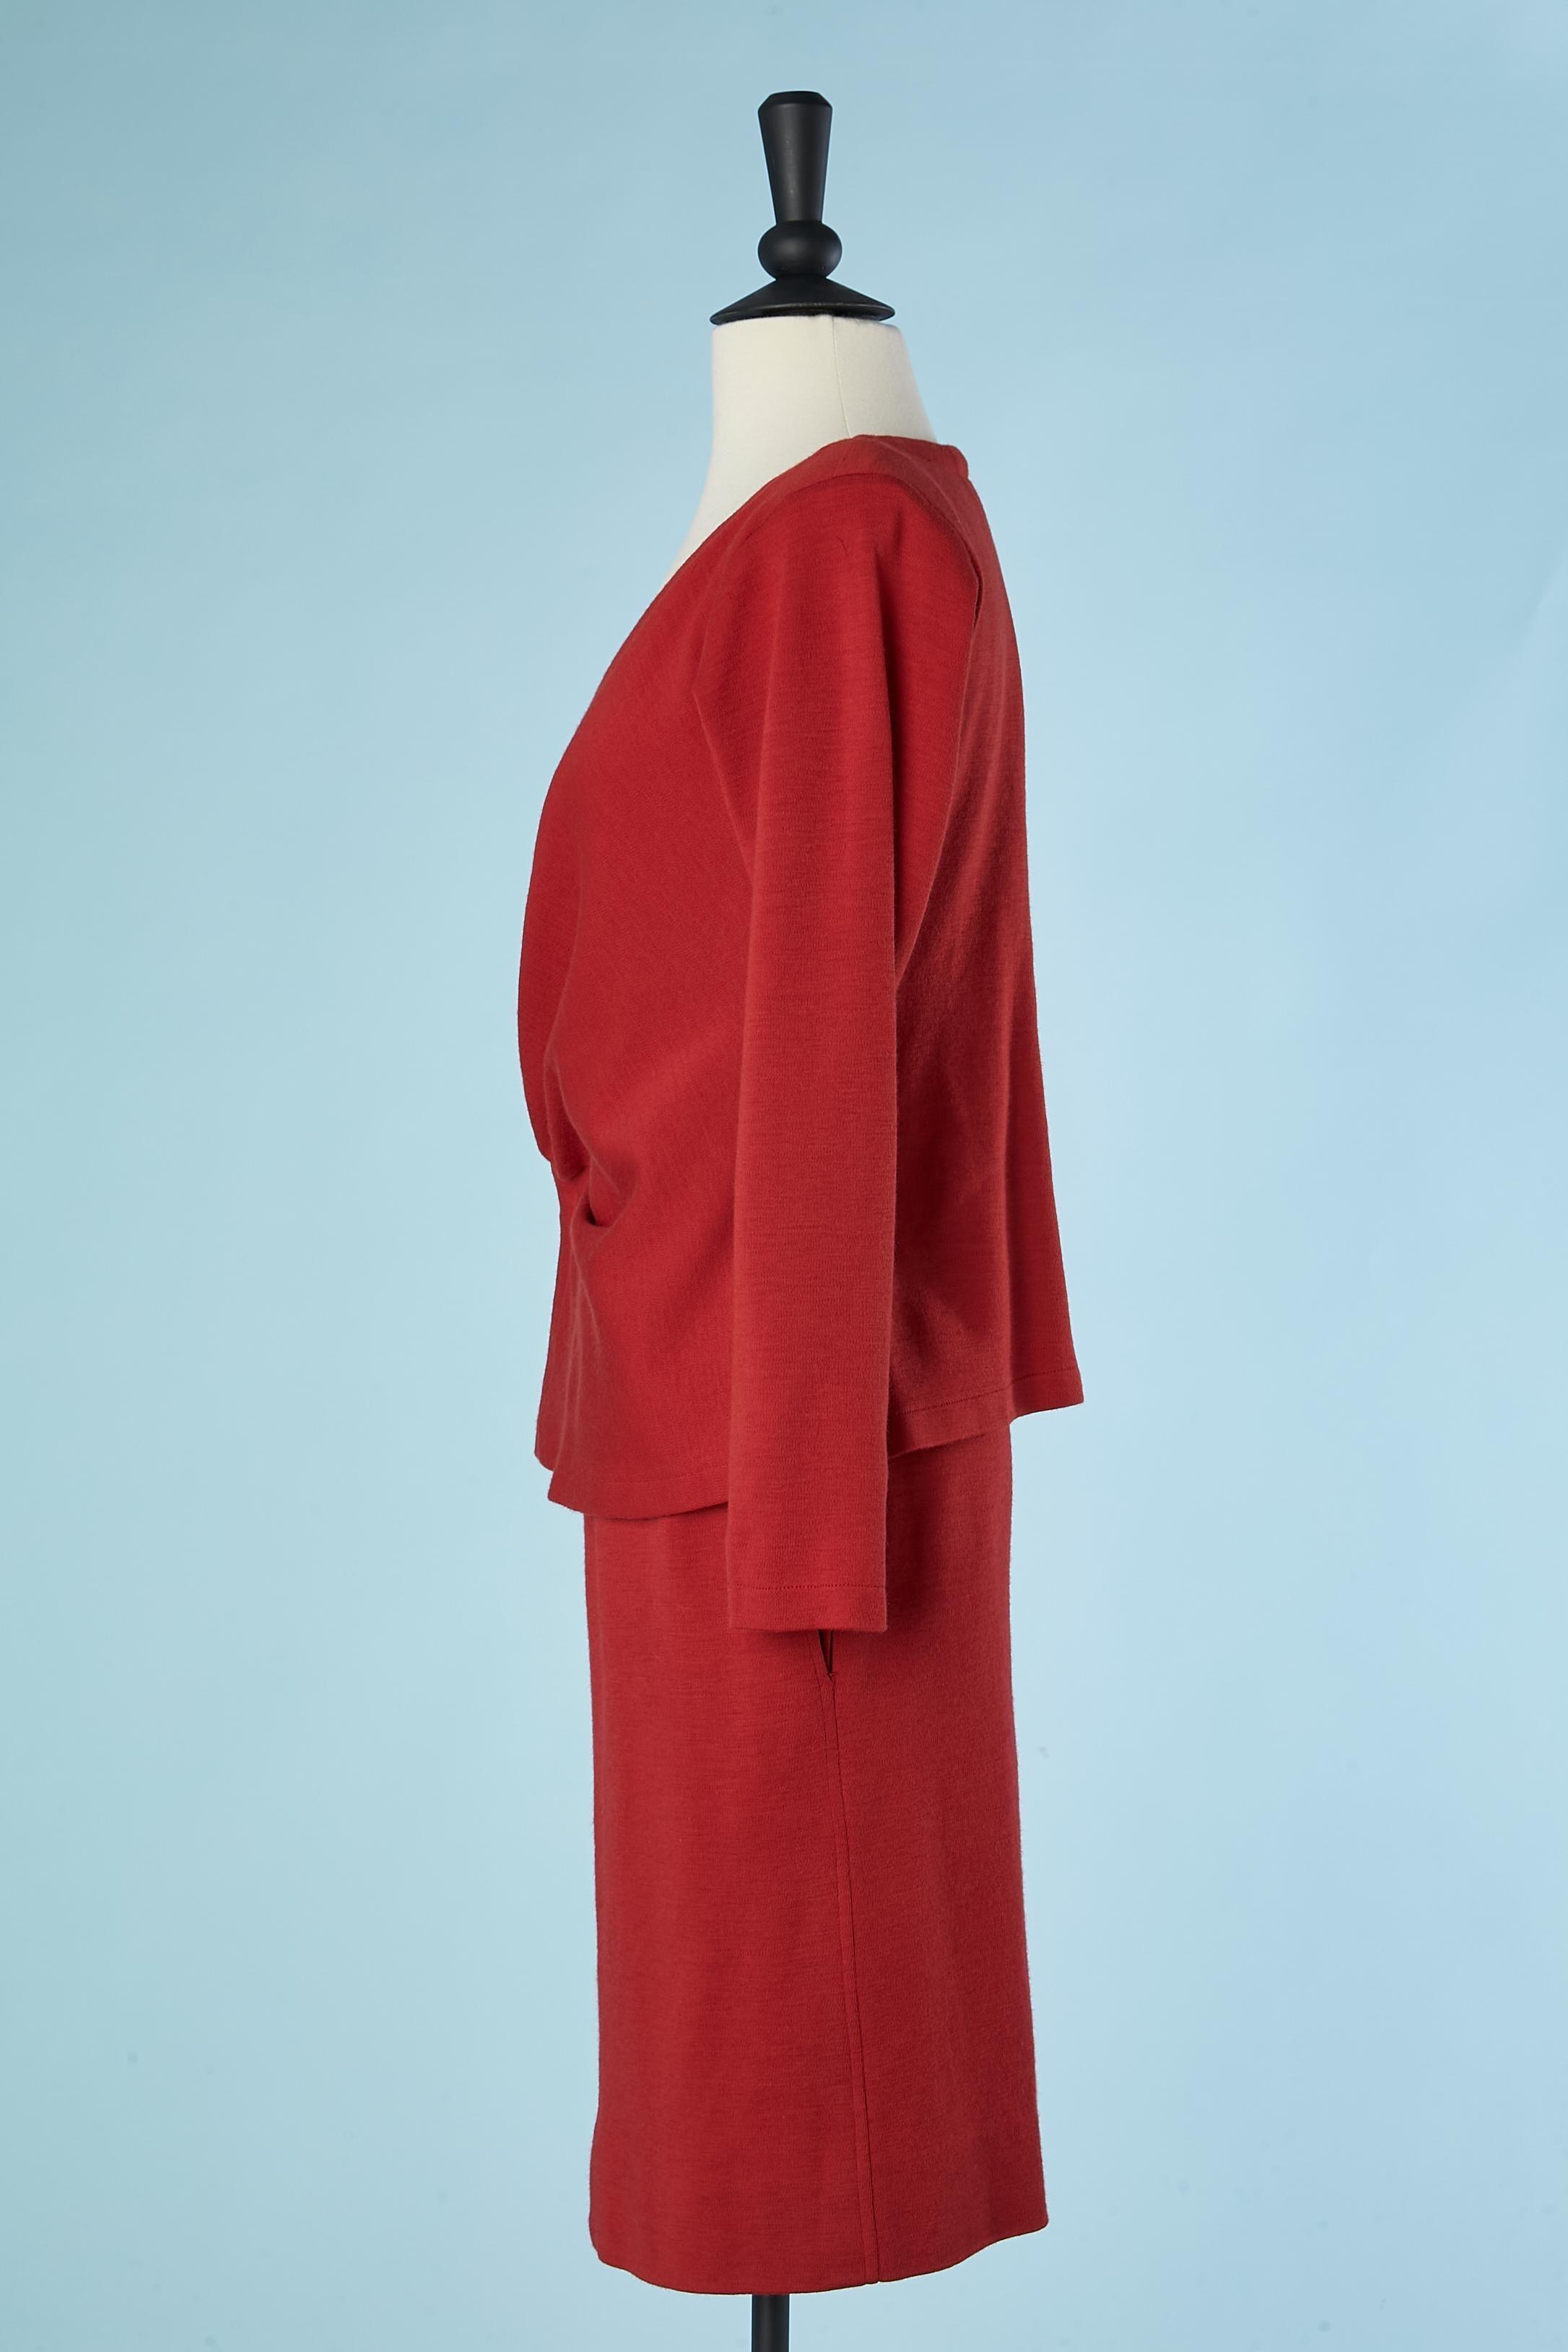 Red Wrap  and drape top in red wool jersey and skirt Saint Laurent Rive Gauche  For Sale